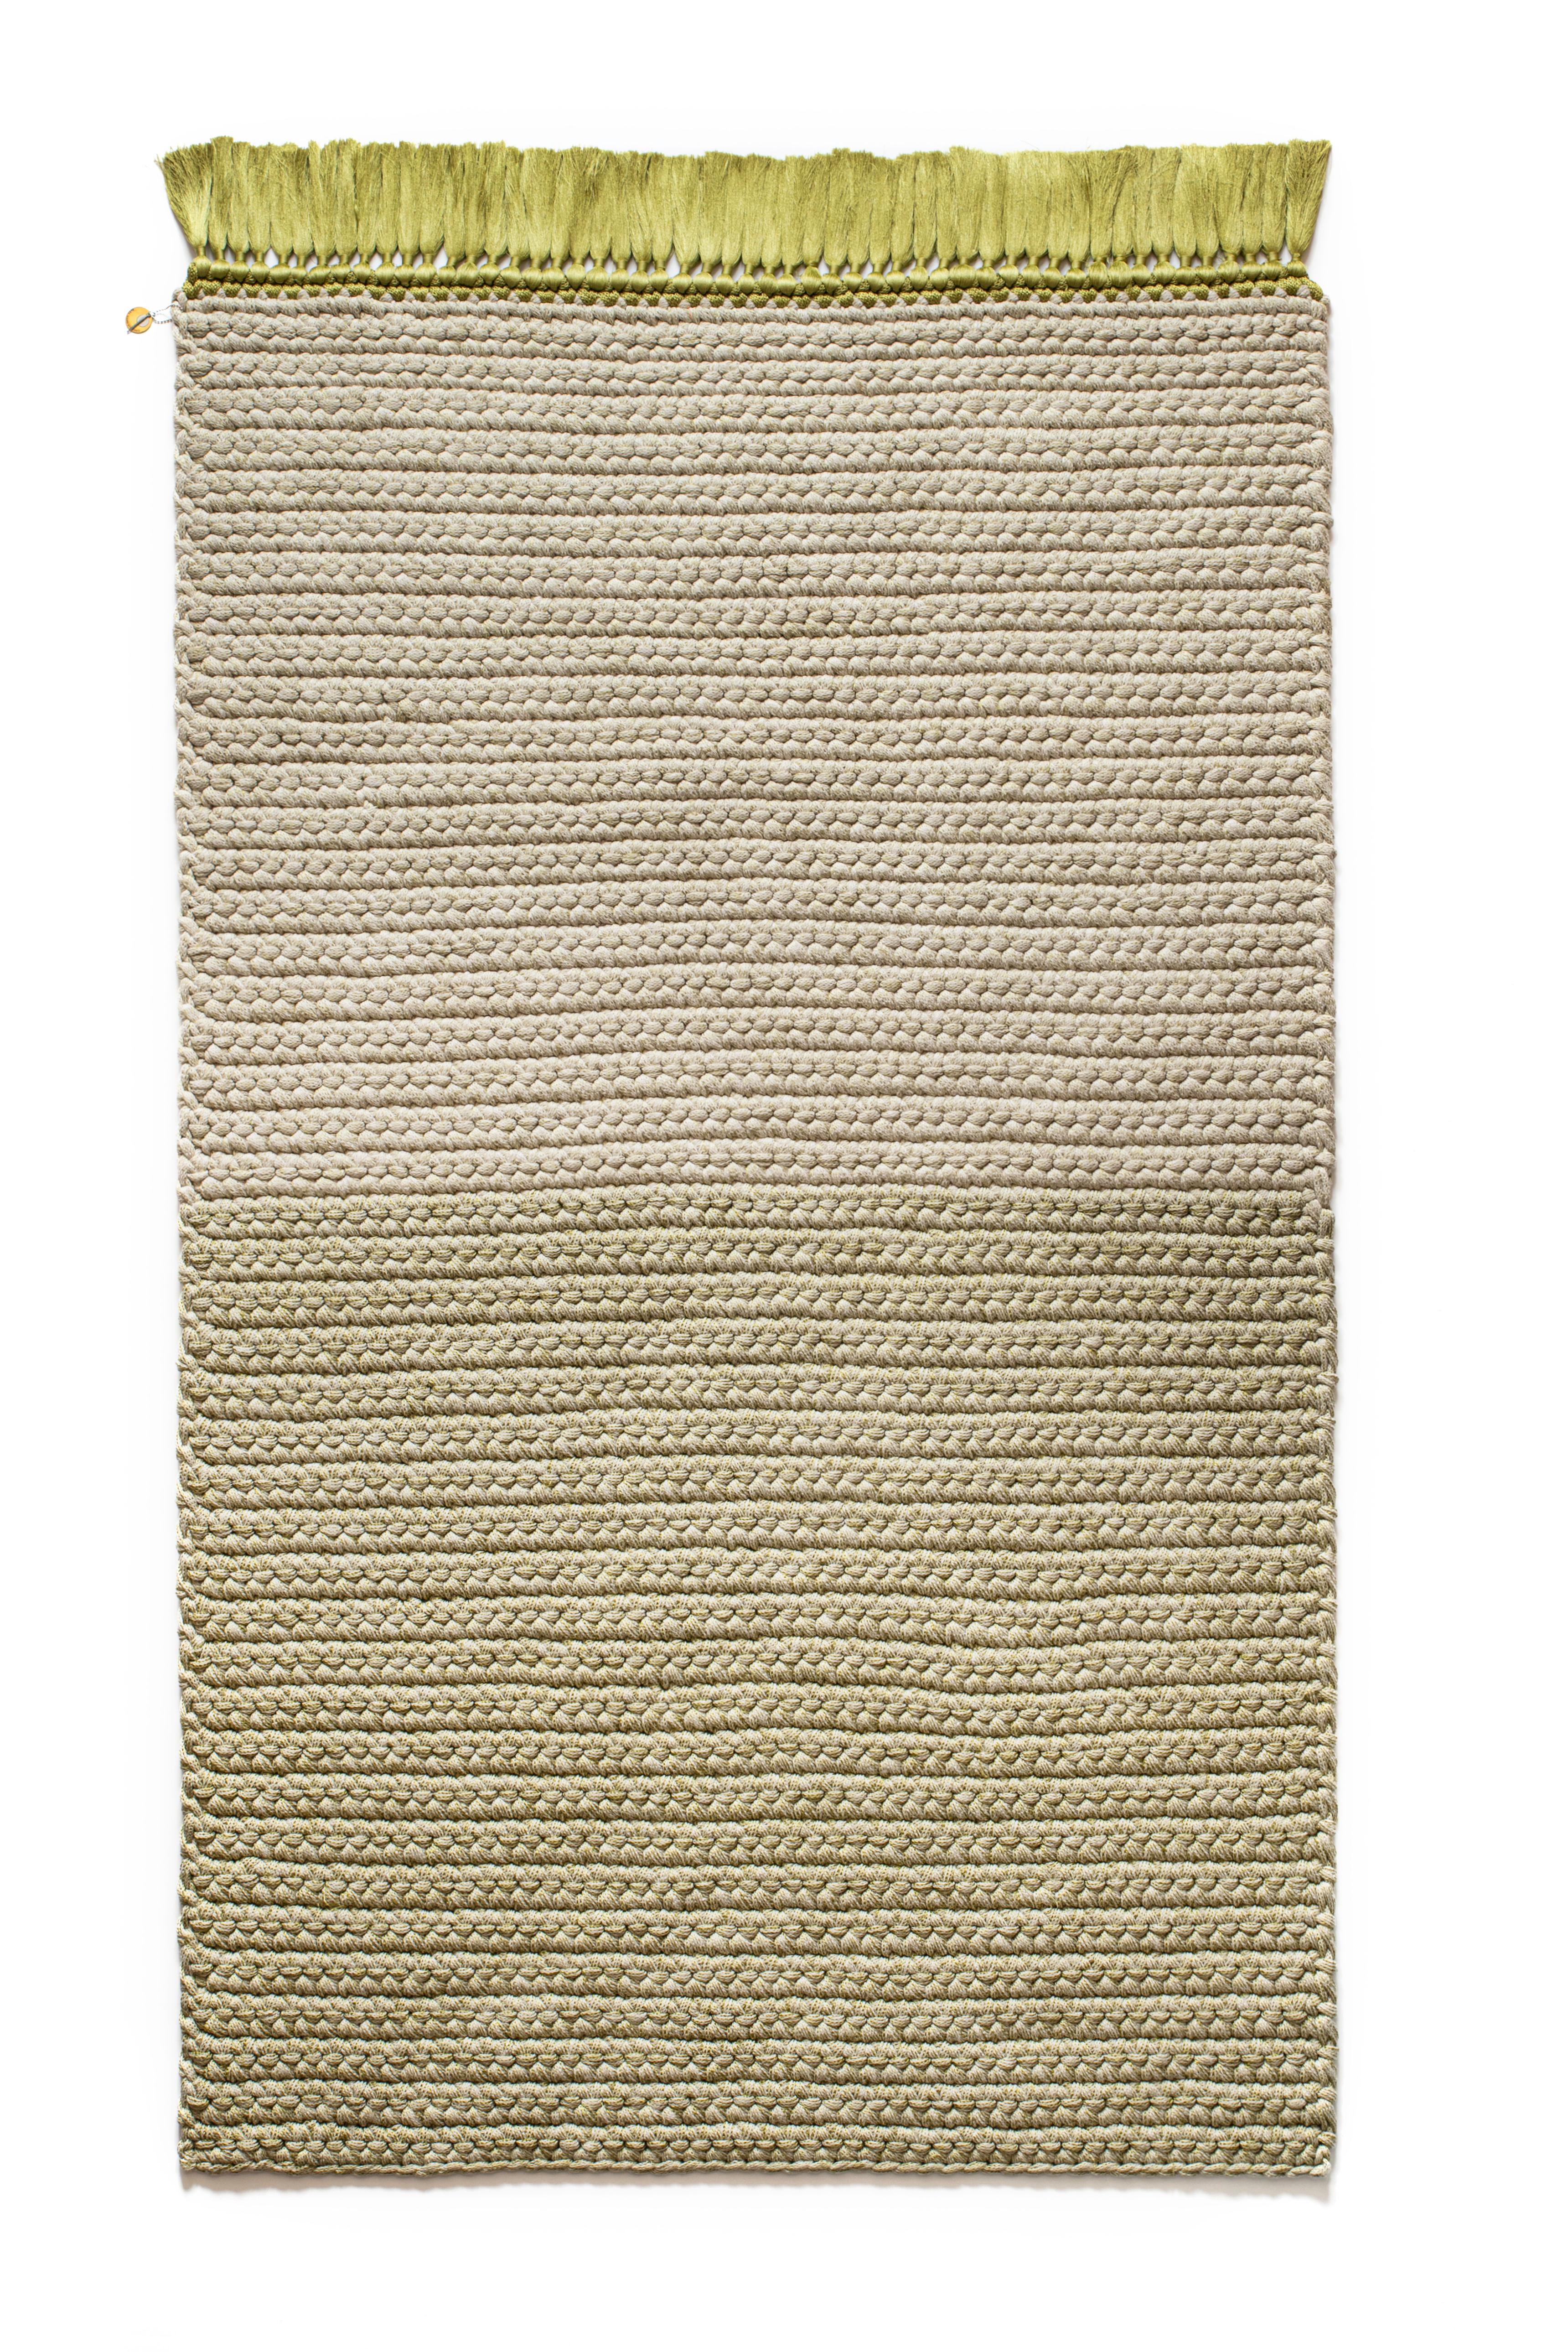 A two-tone green and stone gradient rug that will light up any space, suitable for an intimate corner in the living space as well as for bedrooms, corridors and passages. This rug is 100% hand knit out of one continuous, color changing, soft machine